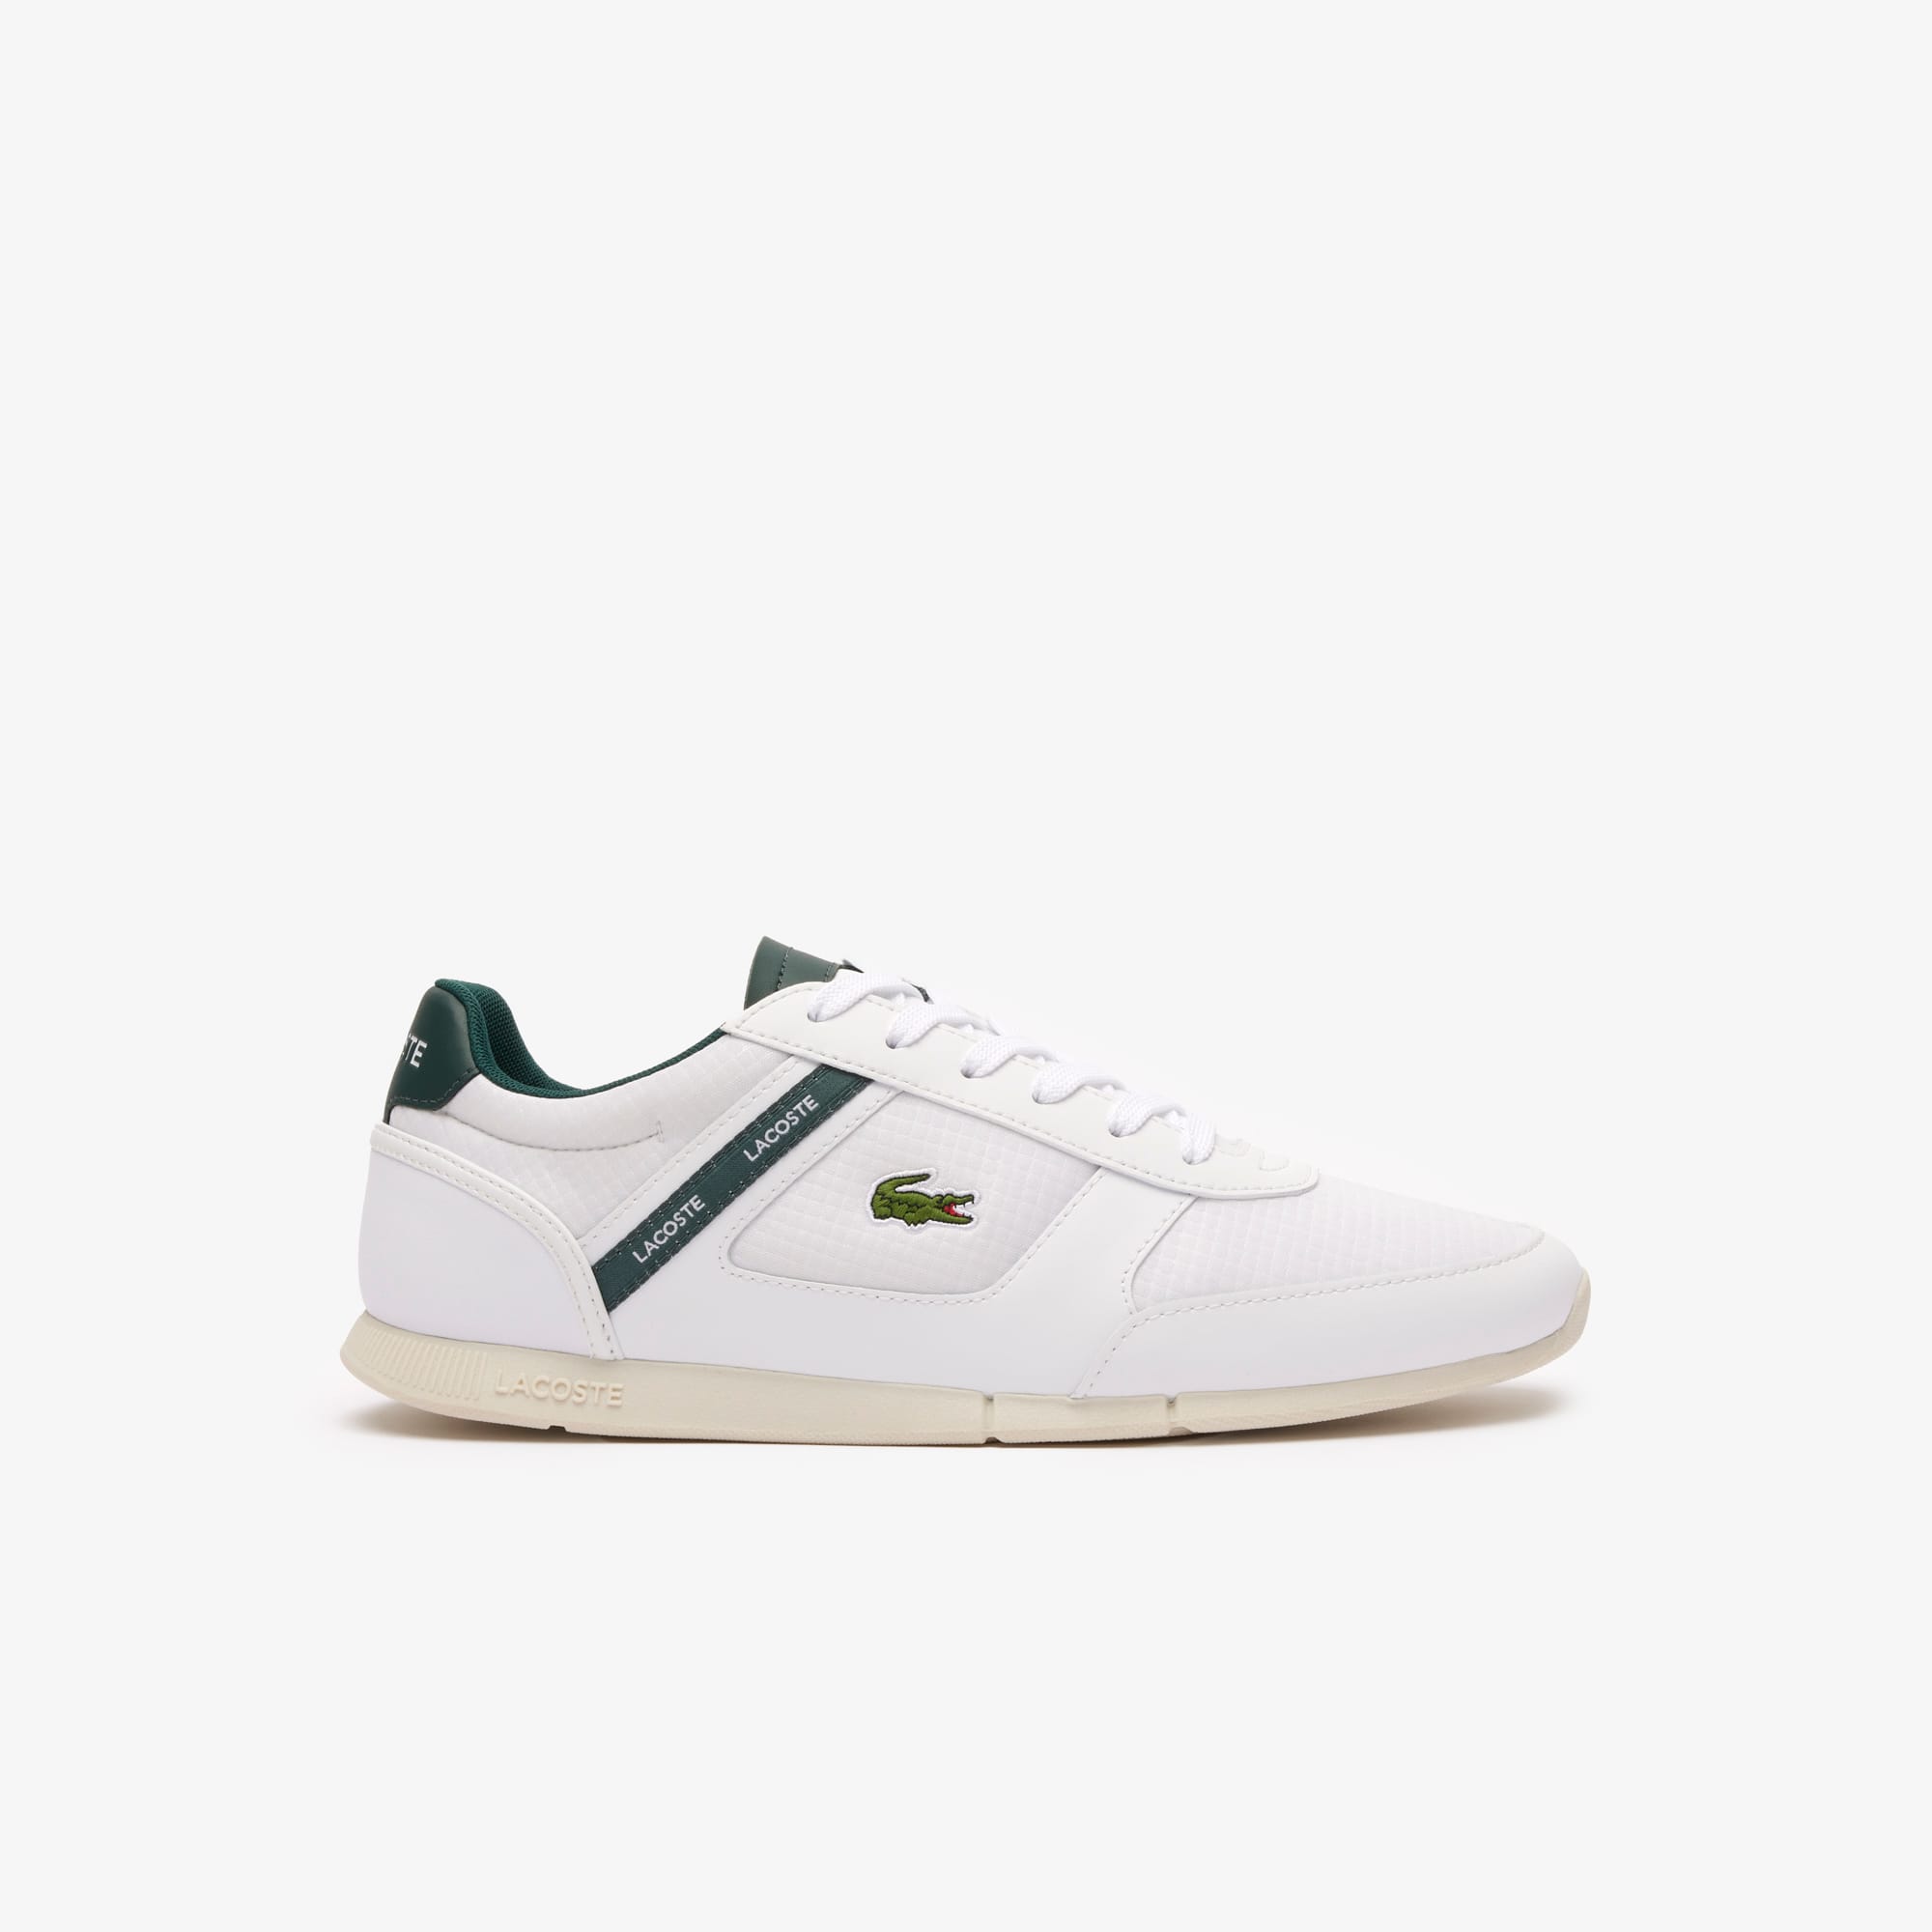 Lacoste Mens Menerva Sport Textile and Leather Sneakers